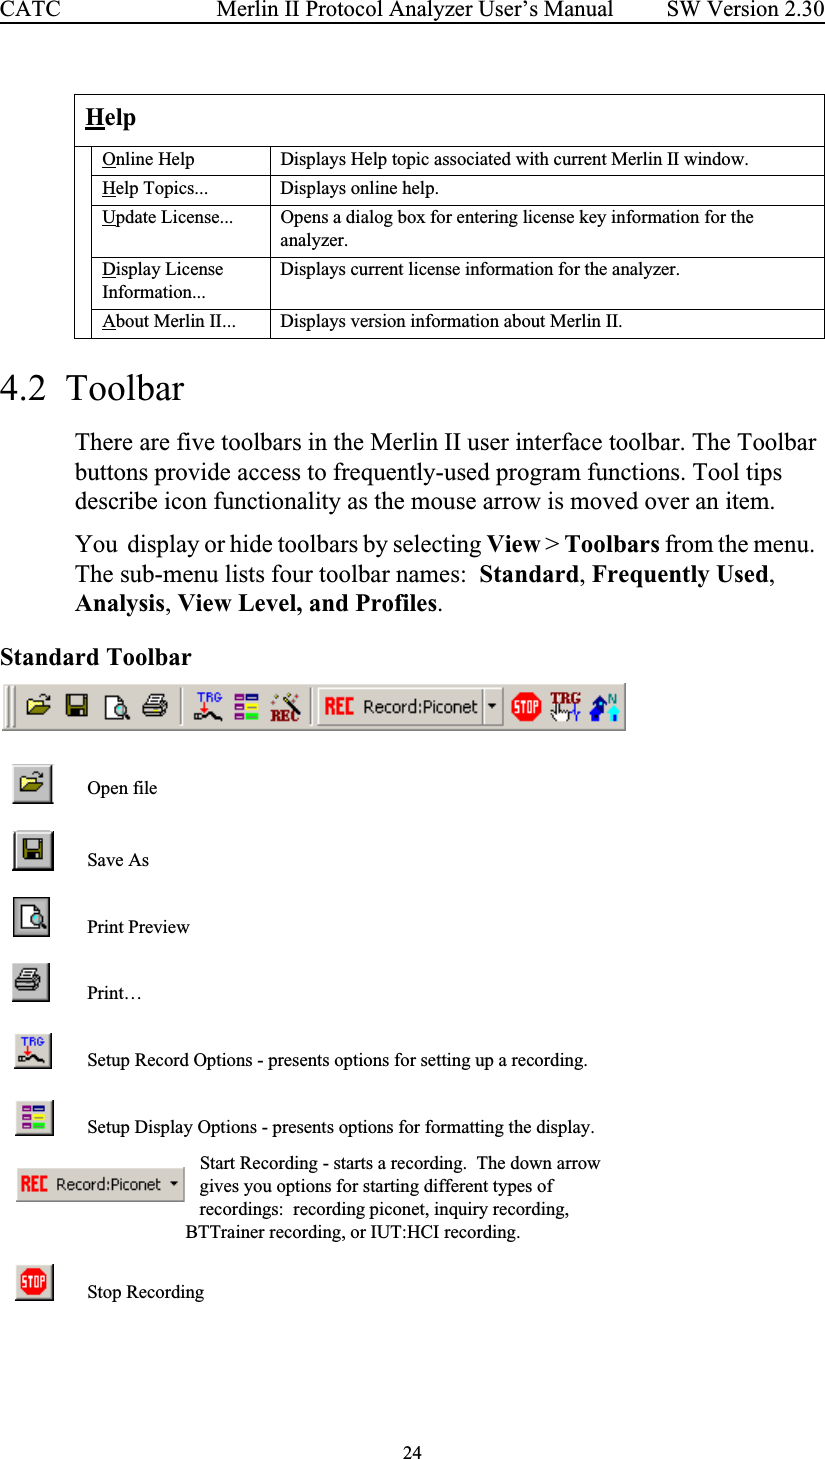 24 Merlin II Protocol Analyzer User’s ManualCATC SW Version 2.304.2  Toolbar There are five toolbars in the Merlin II user interface toolbar. The Toolbar buttons provide access to frequently-used program functions. Tool tips describe icon functionality as the mouse arrow is moved over an item.You  display or hide toolbars by selecting View &gt; Toolbars from the menu.  The sub-menu lists four toolbar names:  Standard, Frequently Used, Analysis, View Level, and Profiles.  Standard Toolbar  HelpOnline Help Displays Help topic associated with current Merlin II window.Help Topics... Displays online help.Update License... Opens a dialog box for entering license key information for the analyzer.Display License Information...Displays current license information for the analyzer.About Merlin II... Displays version information about Merlin II.Open fileSave AsPrint PreviewPrint…Setup Record Options - presents options for setting up a recording.  Setup Display Options - presents options for formatting the display.       Start Recording - starts a recording.  The down arrow                         gives you options for starting different types of                        recordings:  recording piconet, inquiry recording,                     BTTrainer recording, or IUT:HCI recording.Stop Recording